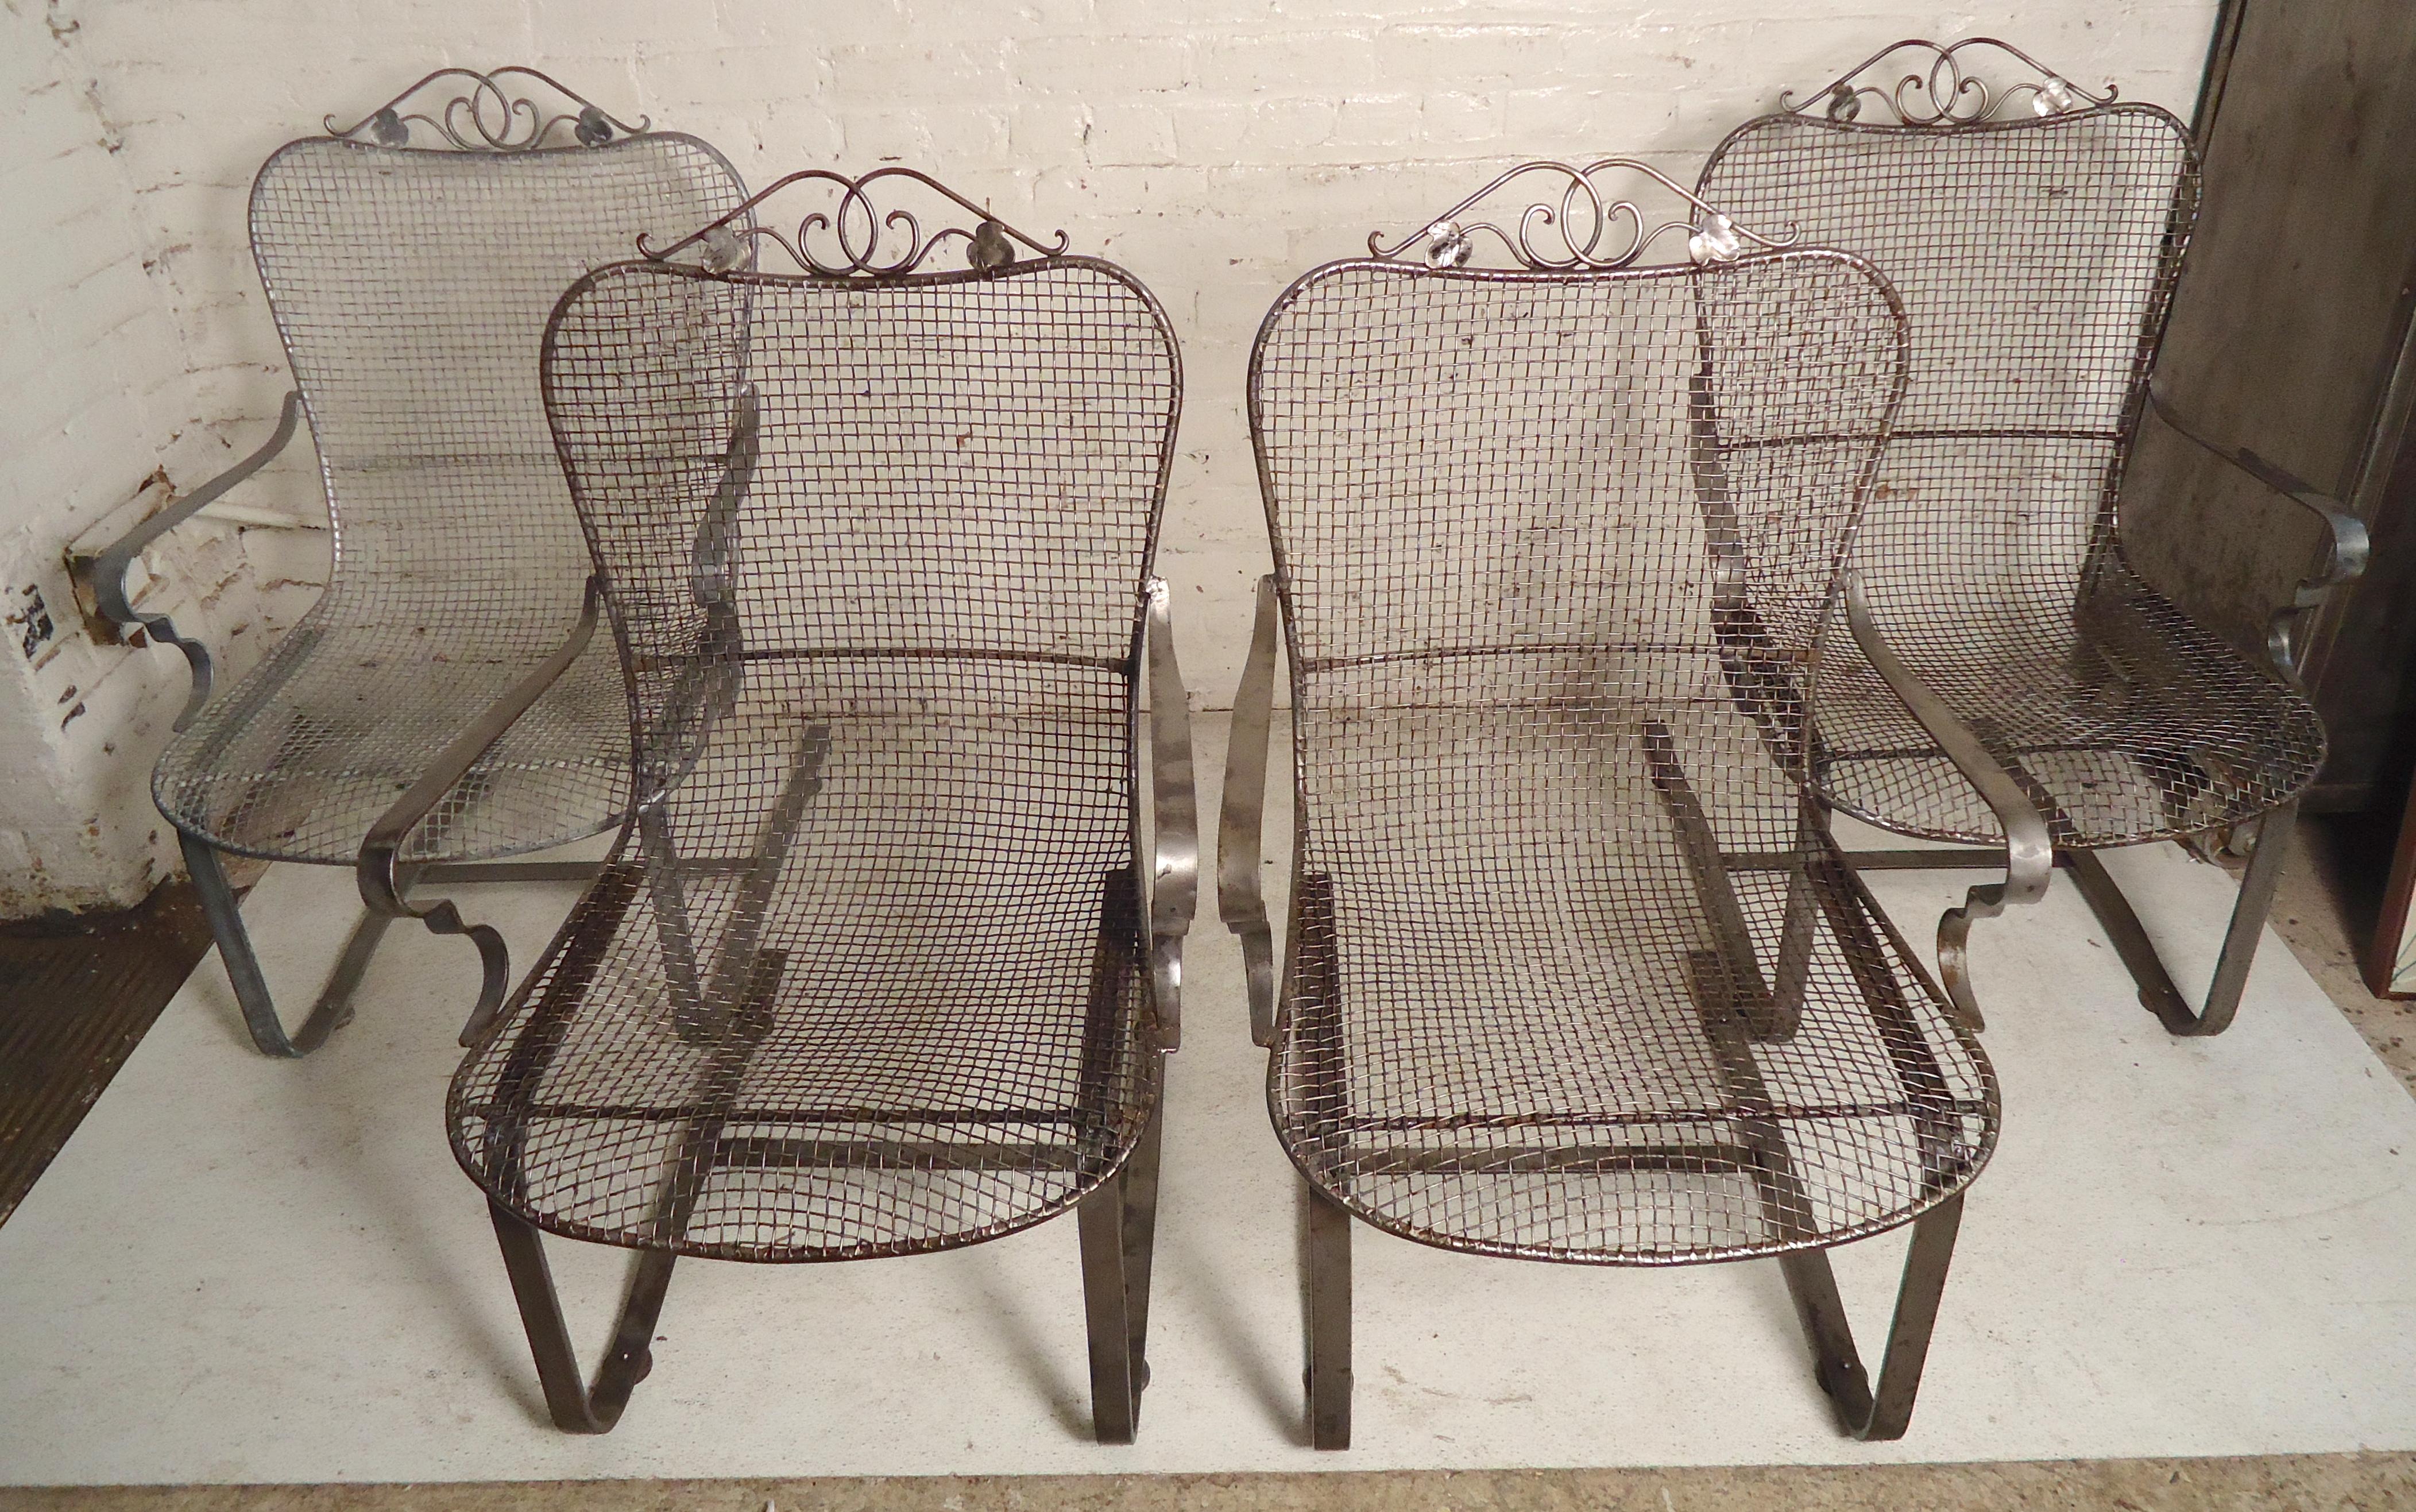 Set of four outdoor chairs with mesh metal seating on strong spring bases. Attractive floral detailing.

(Please confirm item location - NY or NJ - with dealer)
     